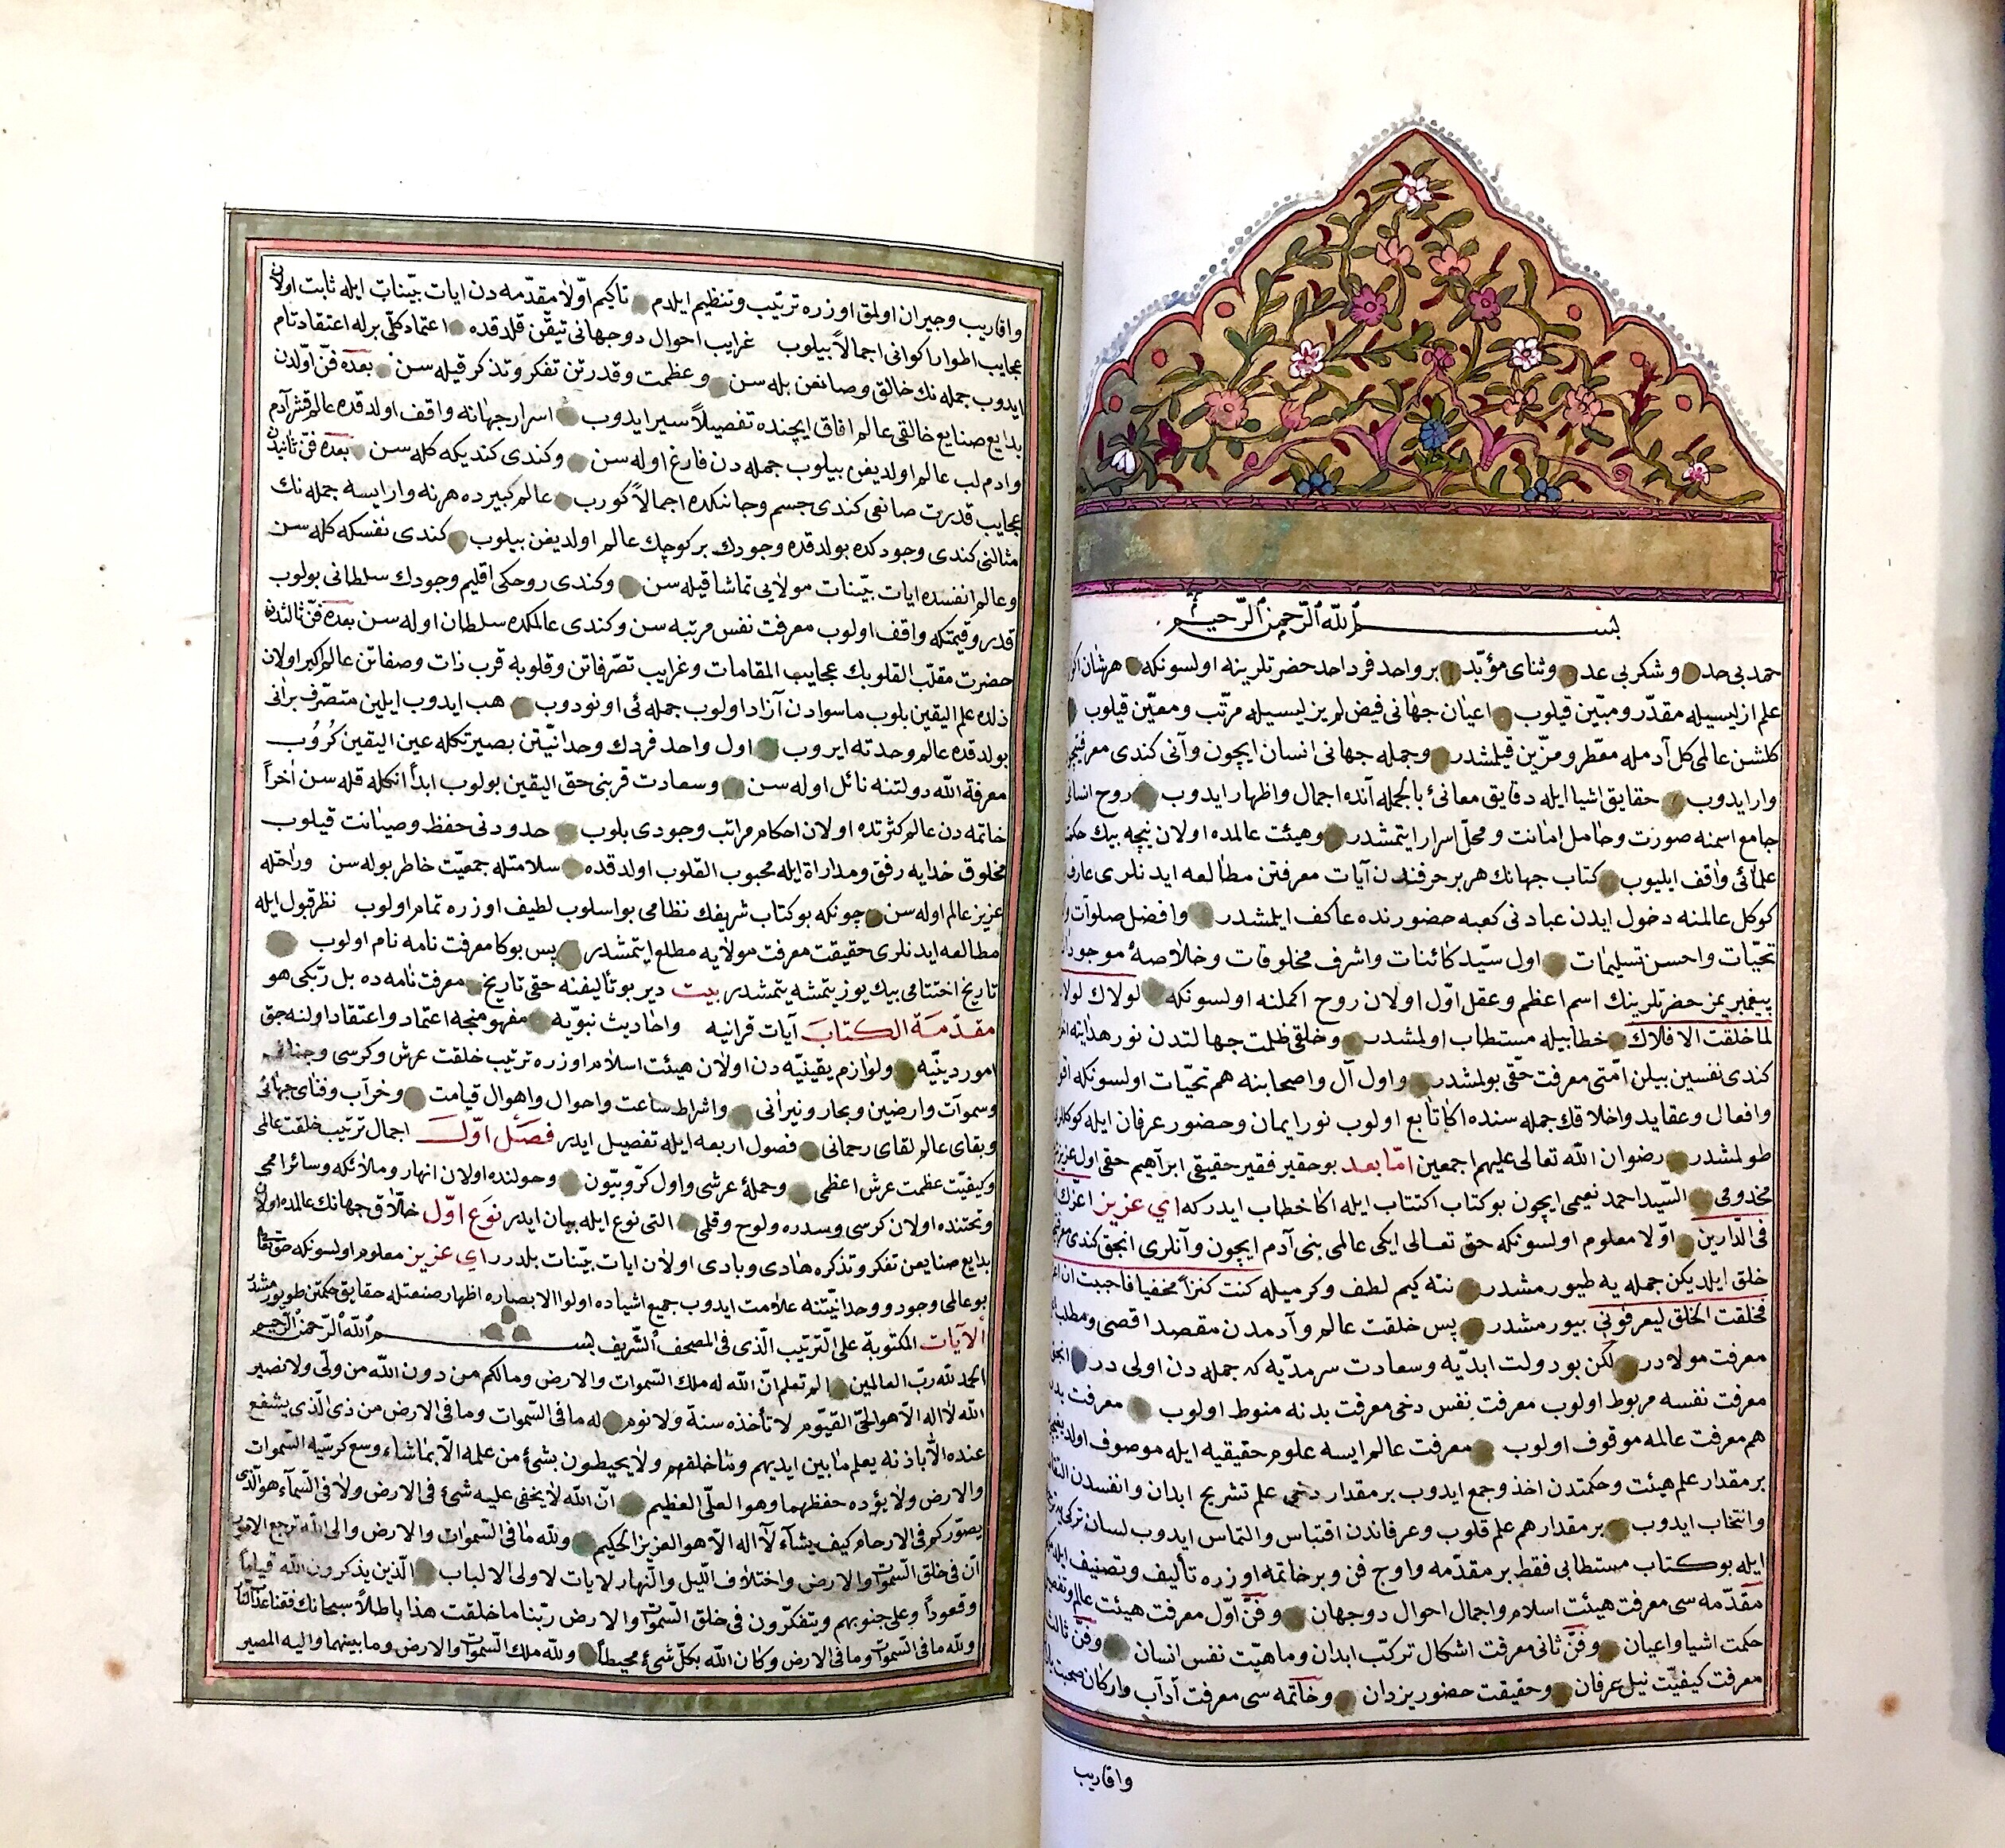 An image of manuscript pages with text in Arabic script in black ink and an illuminated headpiece with floral designs.